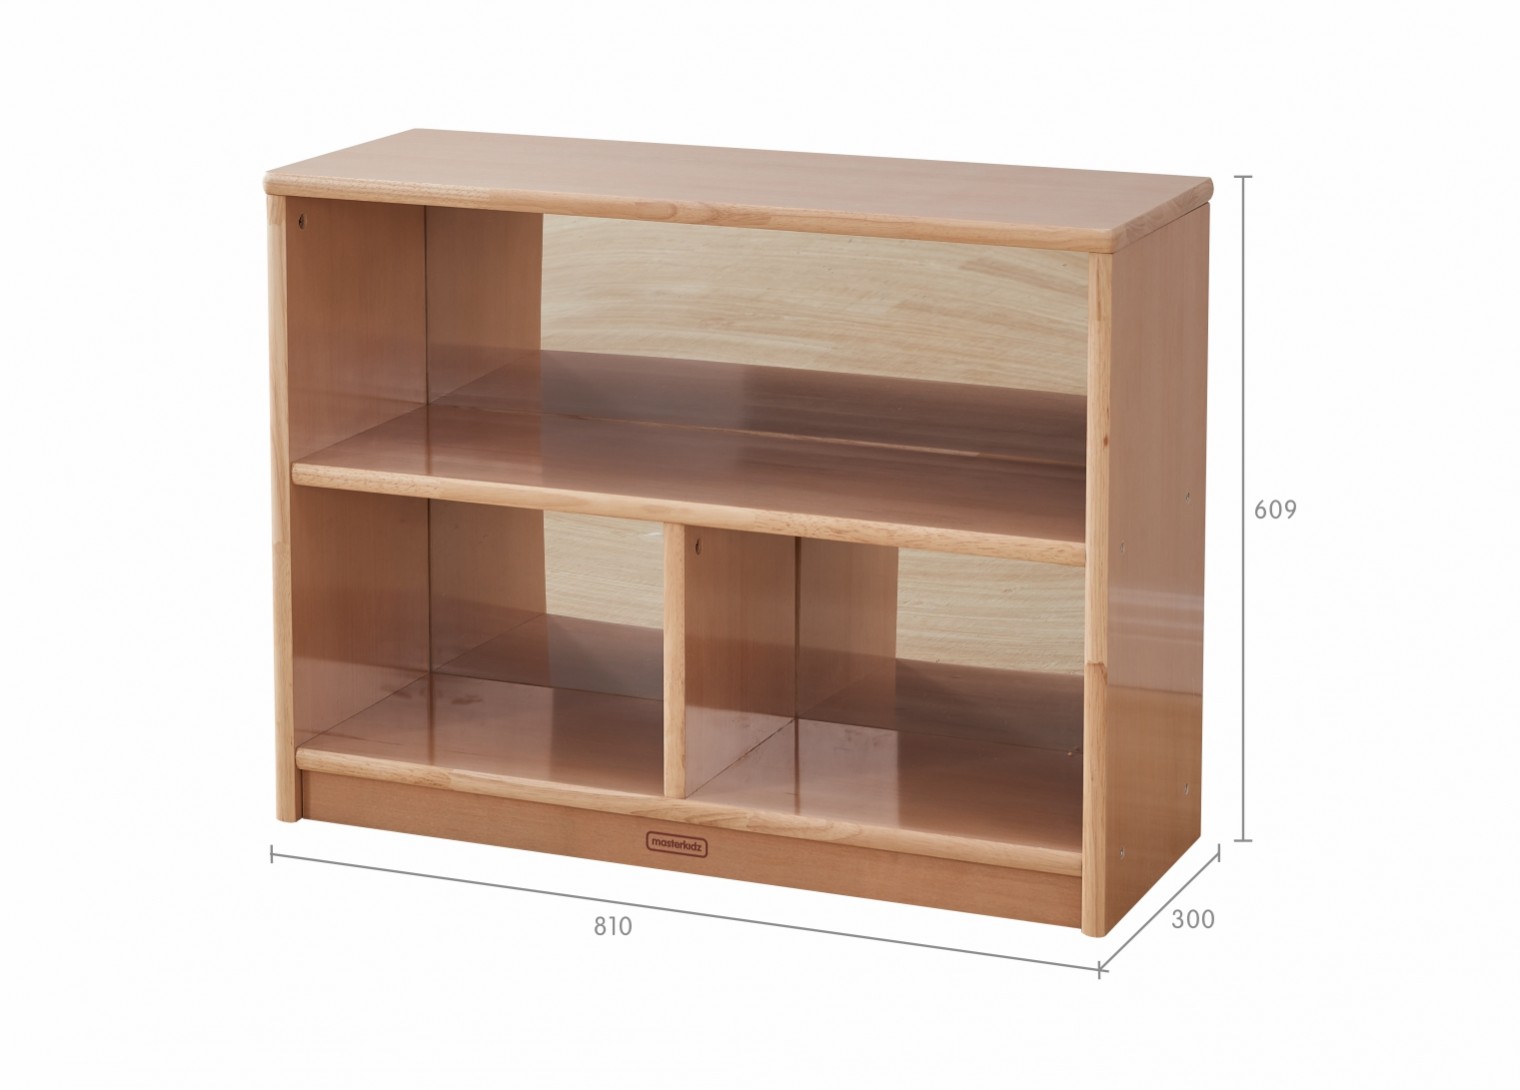 Forest School - 609H x 810L Wooden  3-Compartment Shelving Unit - Anti-Scratch Acrylic Mirror Back